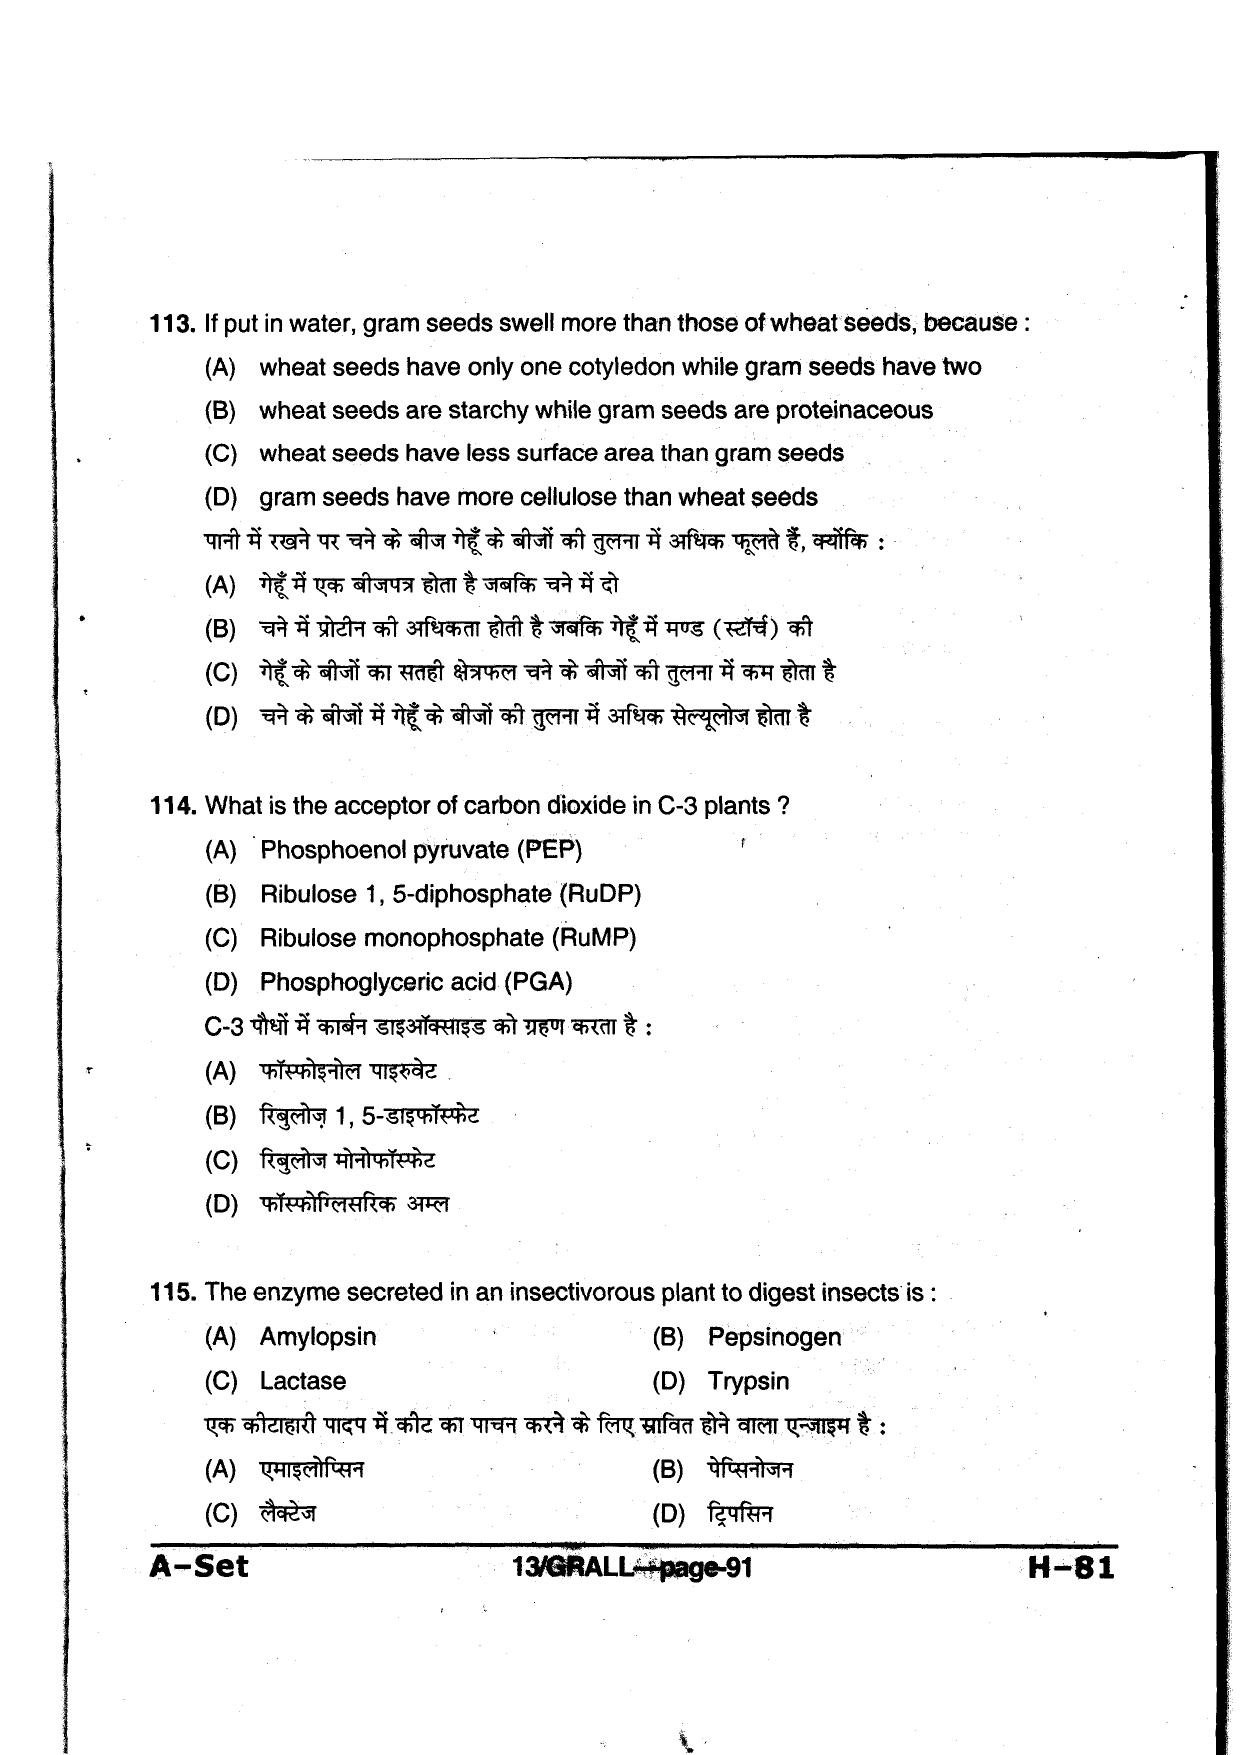 MP PAT 2013 Question Paper - Paper I - Page 91